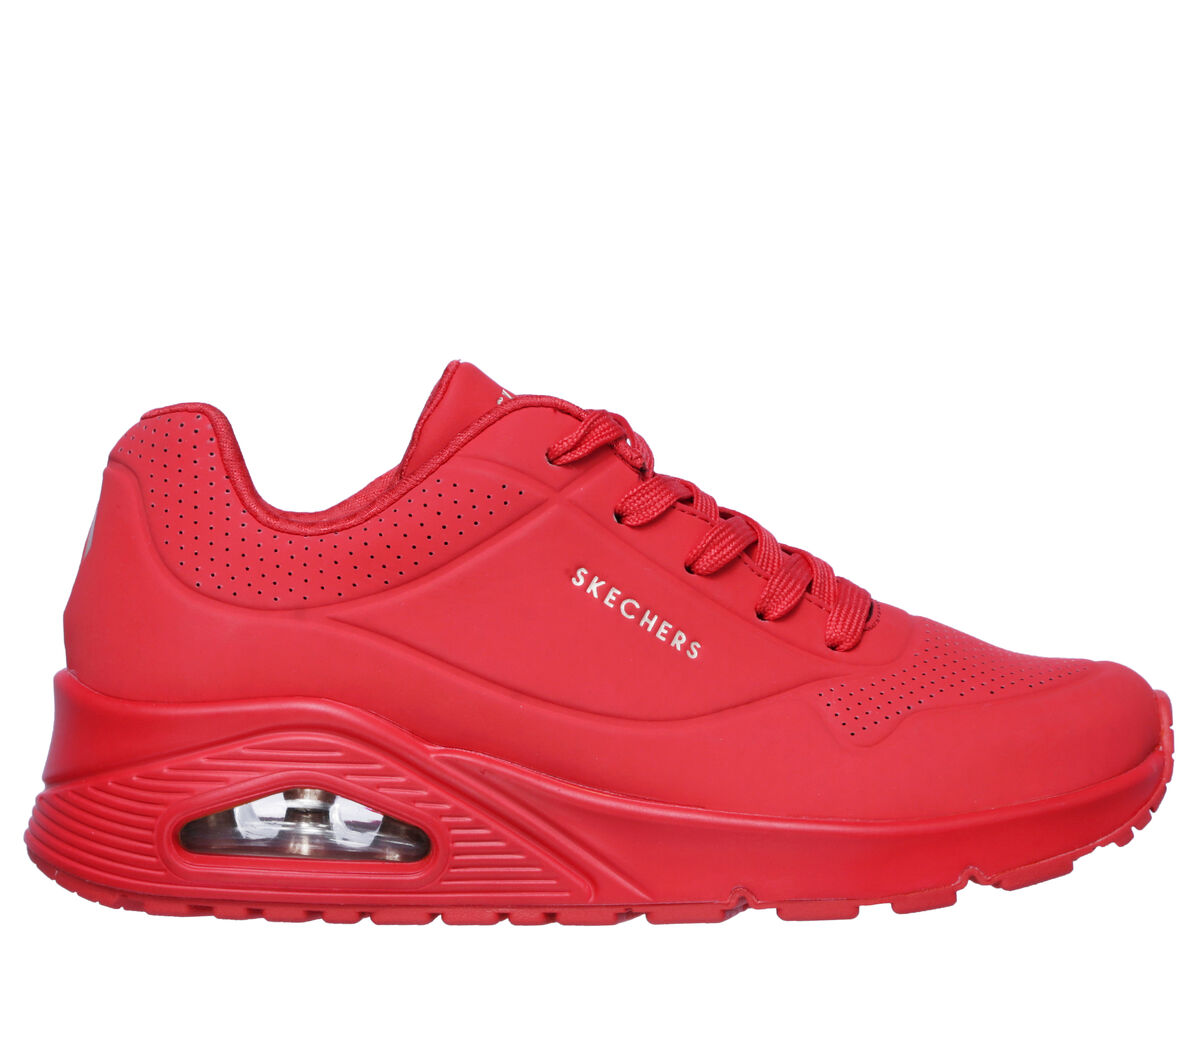 Skechers Sneakers - Uno - Stand On Air - 73690-RED - Online shop for  sneakers, shoes and boots